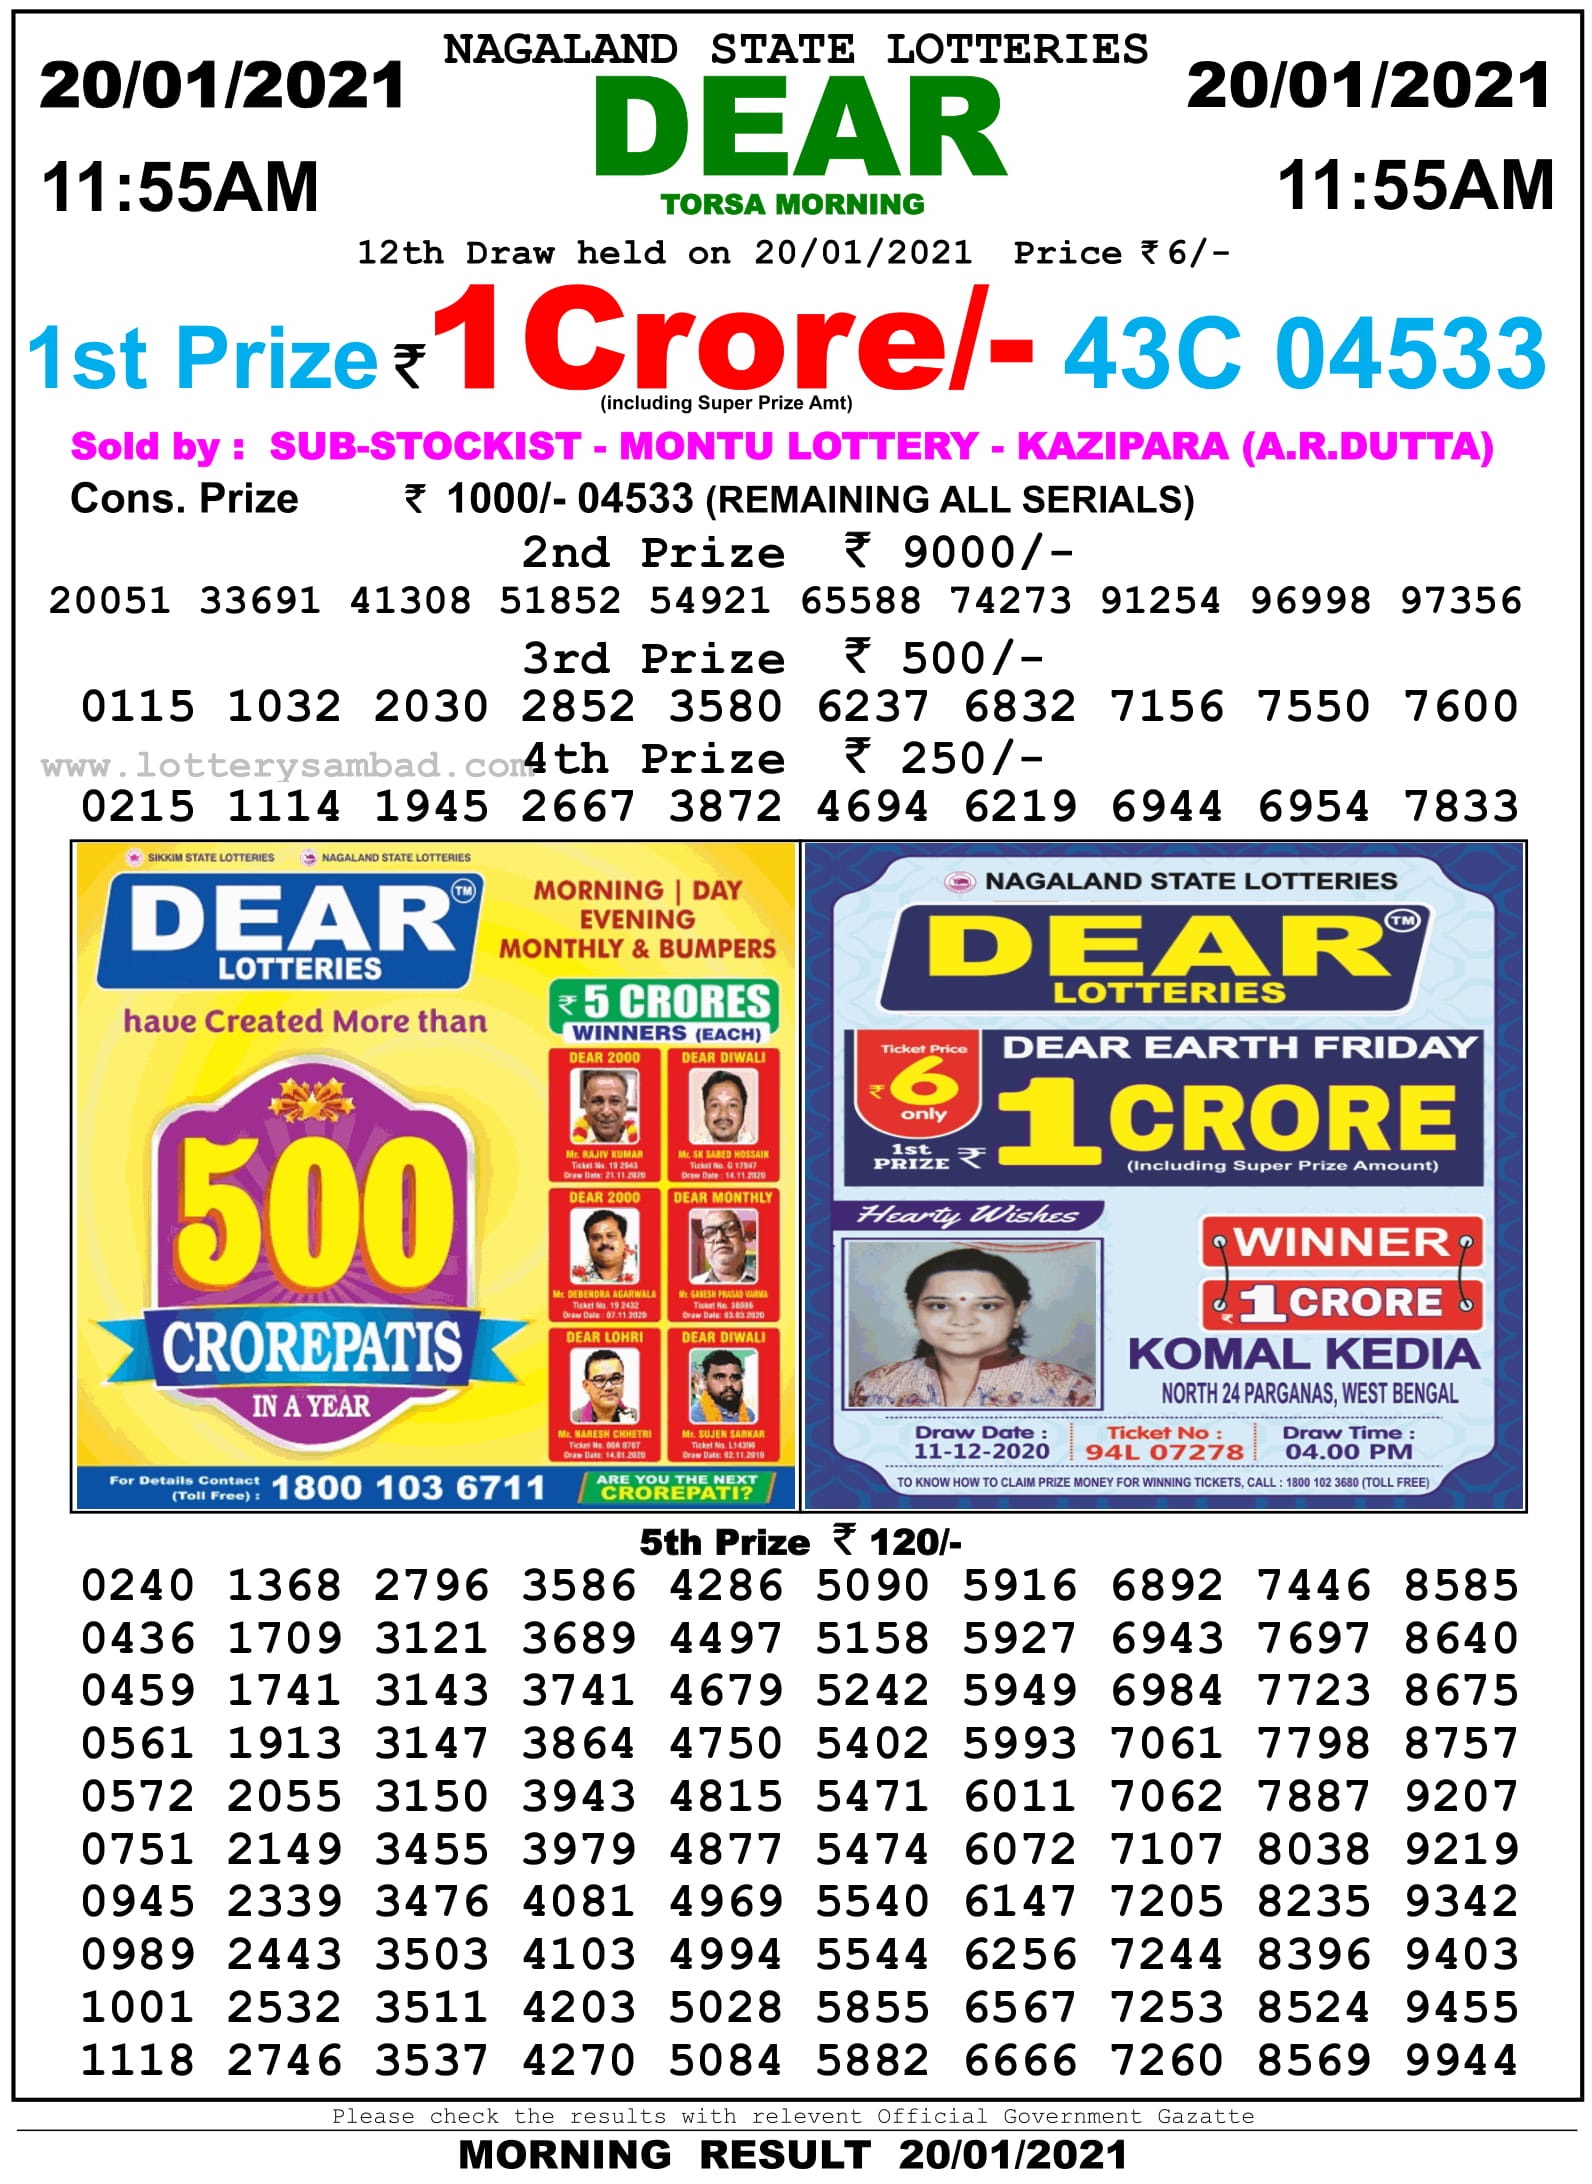 Sikkim State Lottery Result 11.55 AM 21.1.2021